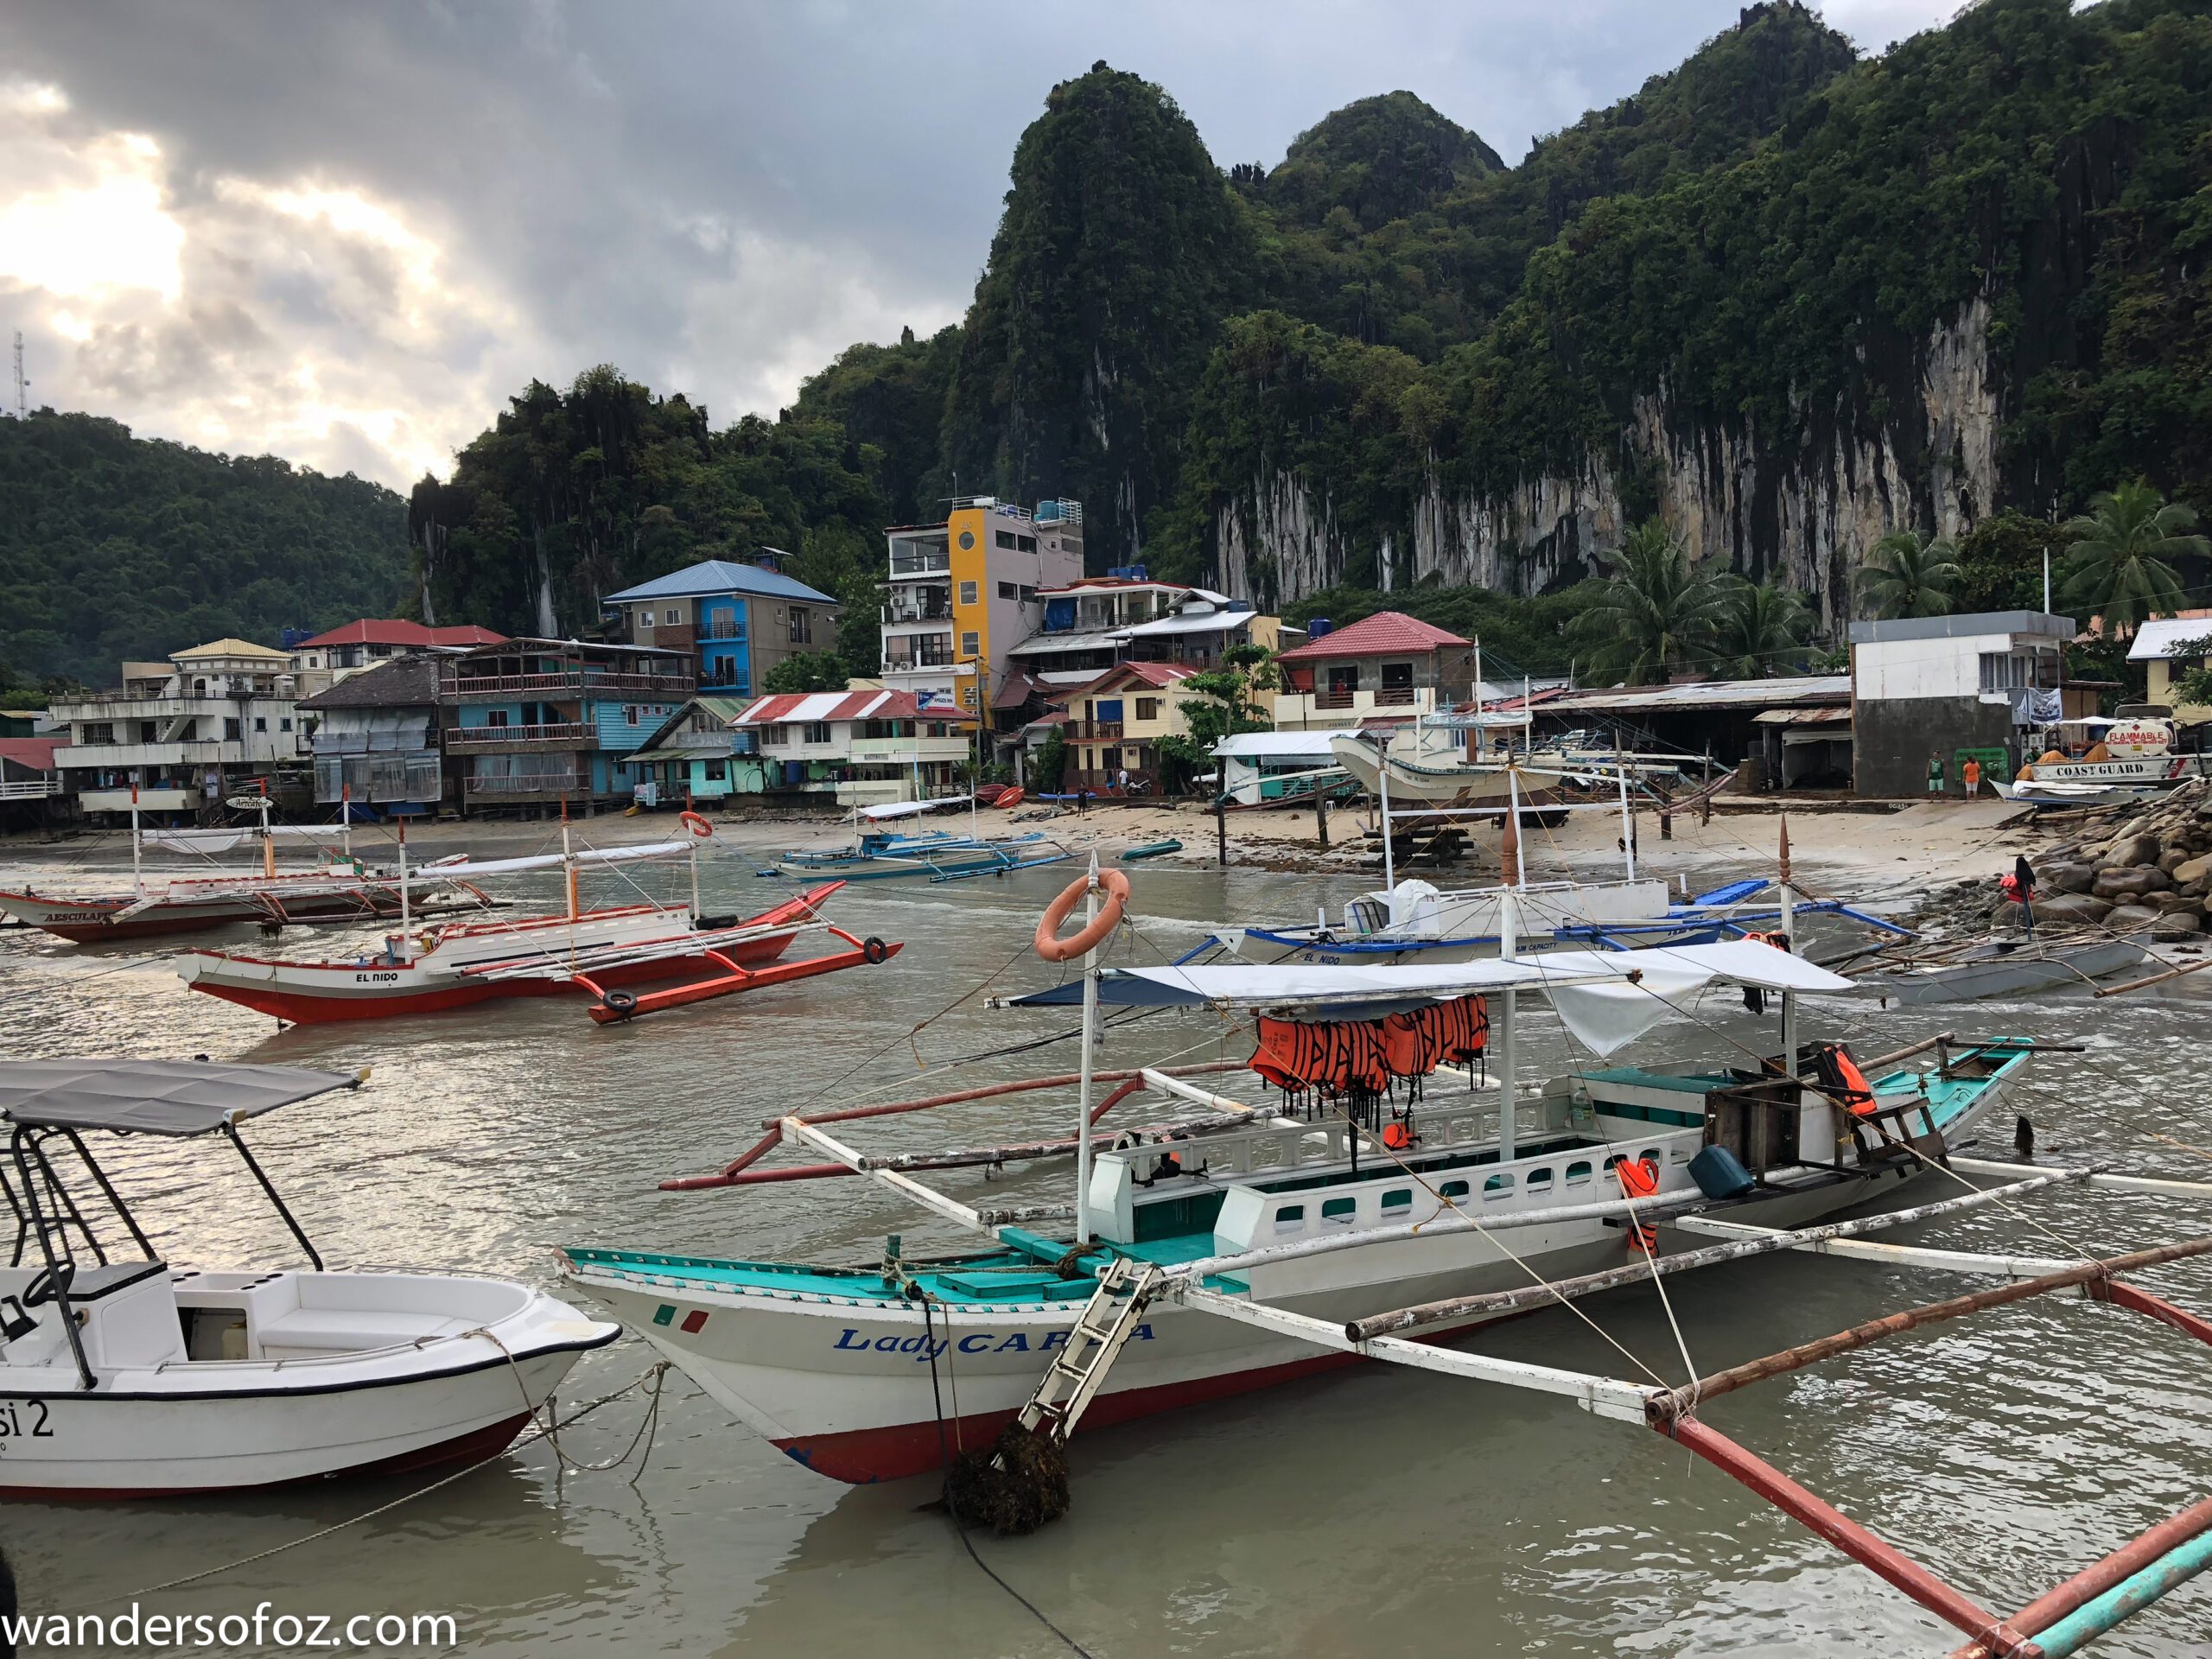 32 structures in El Nido shoreline easement zone up for eviction